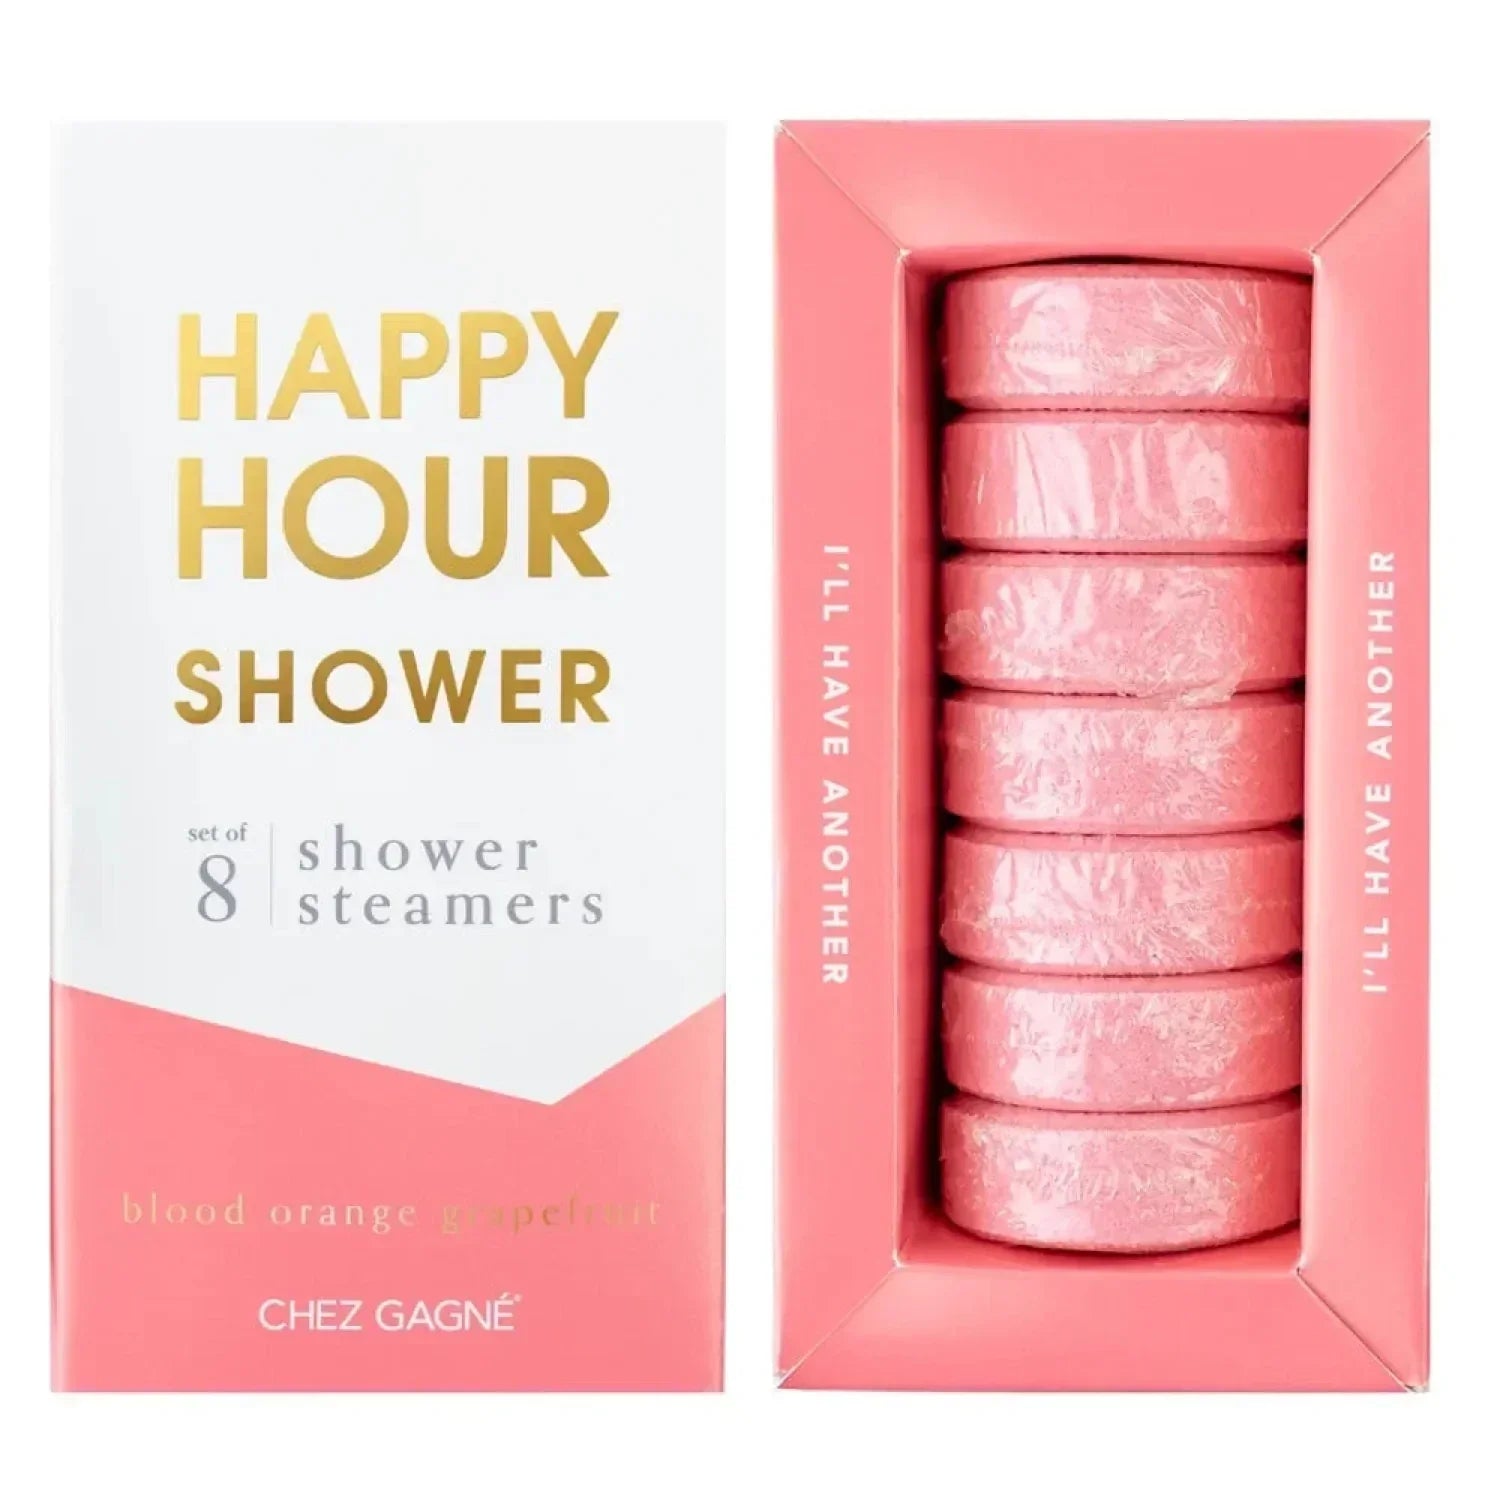 Chez Gagné 10. GIFTS|ACCESSORIES - GIFT - GIFT Shower Steamer HAPPY HOUR